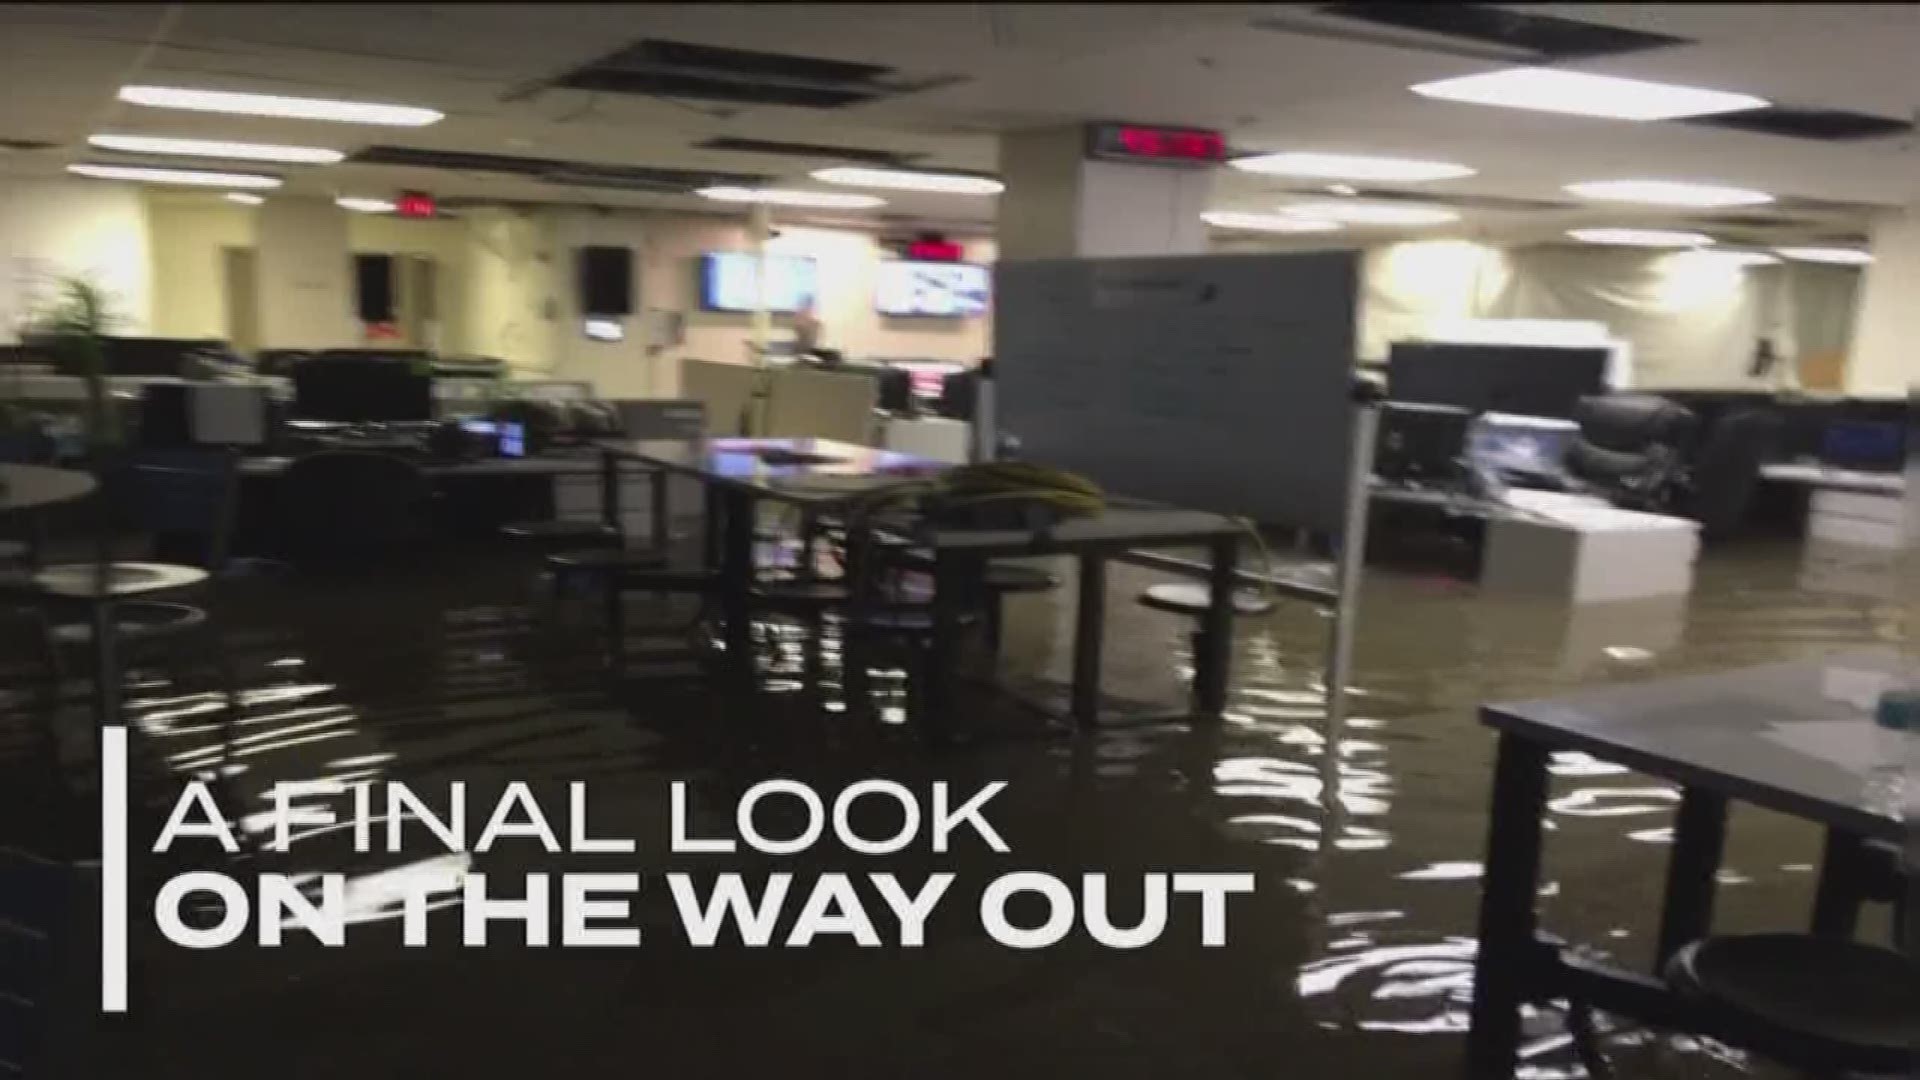 Like tens of thousands of Houstonians, KHOU 11 employees were forced to evacuate during Hurricane Harvey. Despite requests to share our story from all over the country, we made a conscious decision not to, because so many people were suffering and we didn